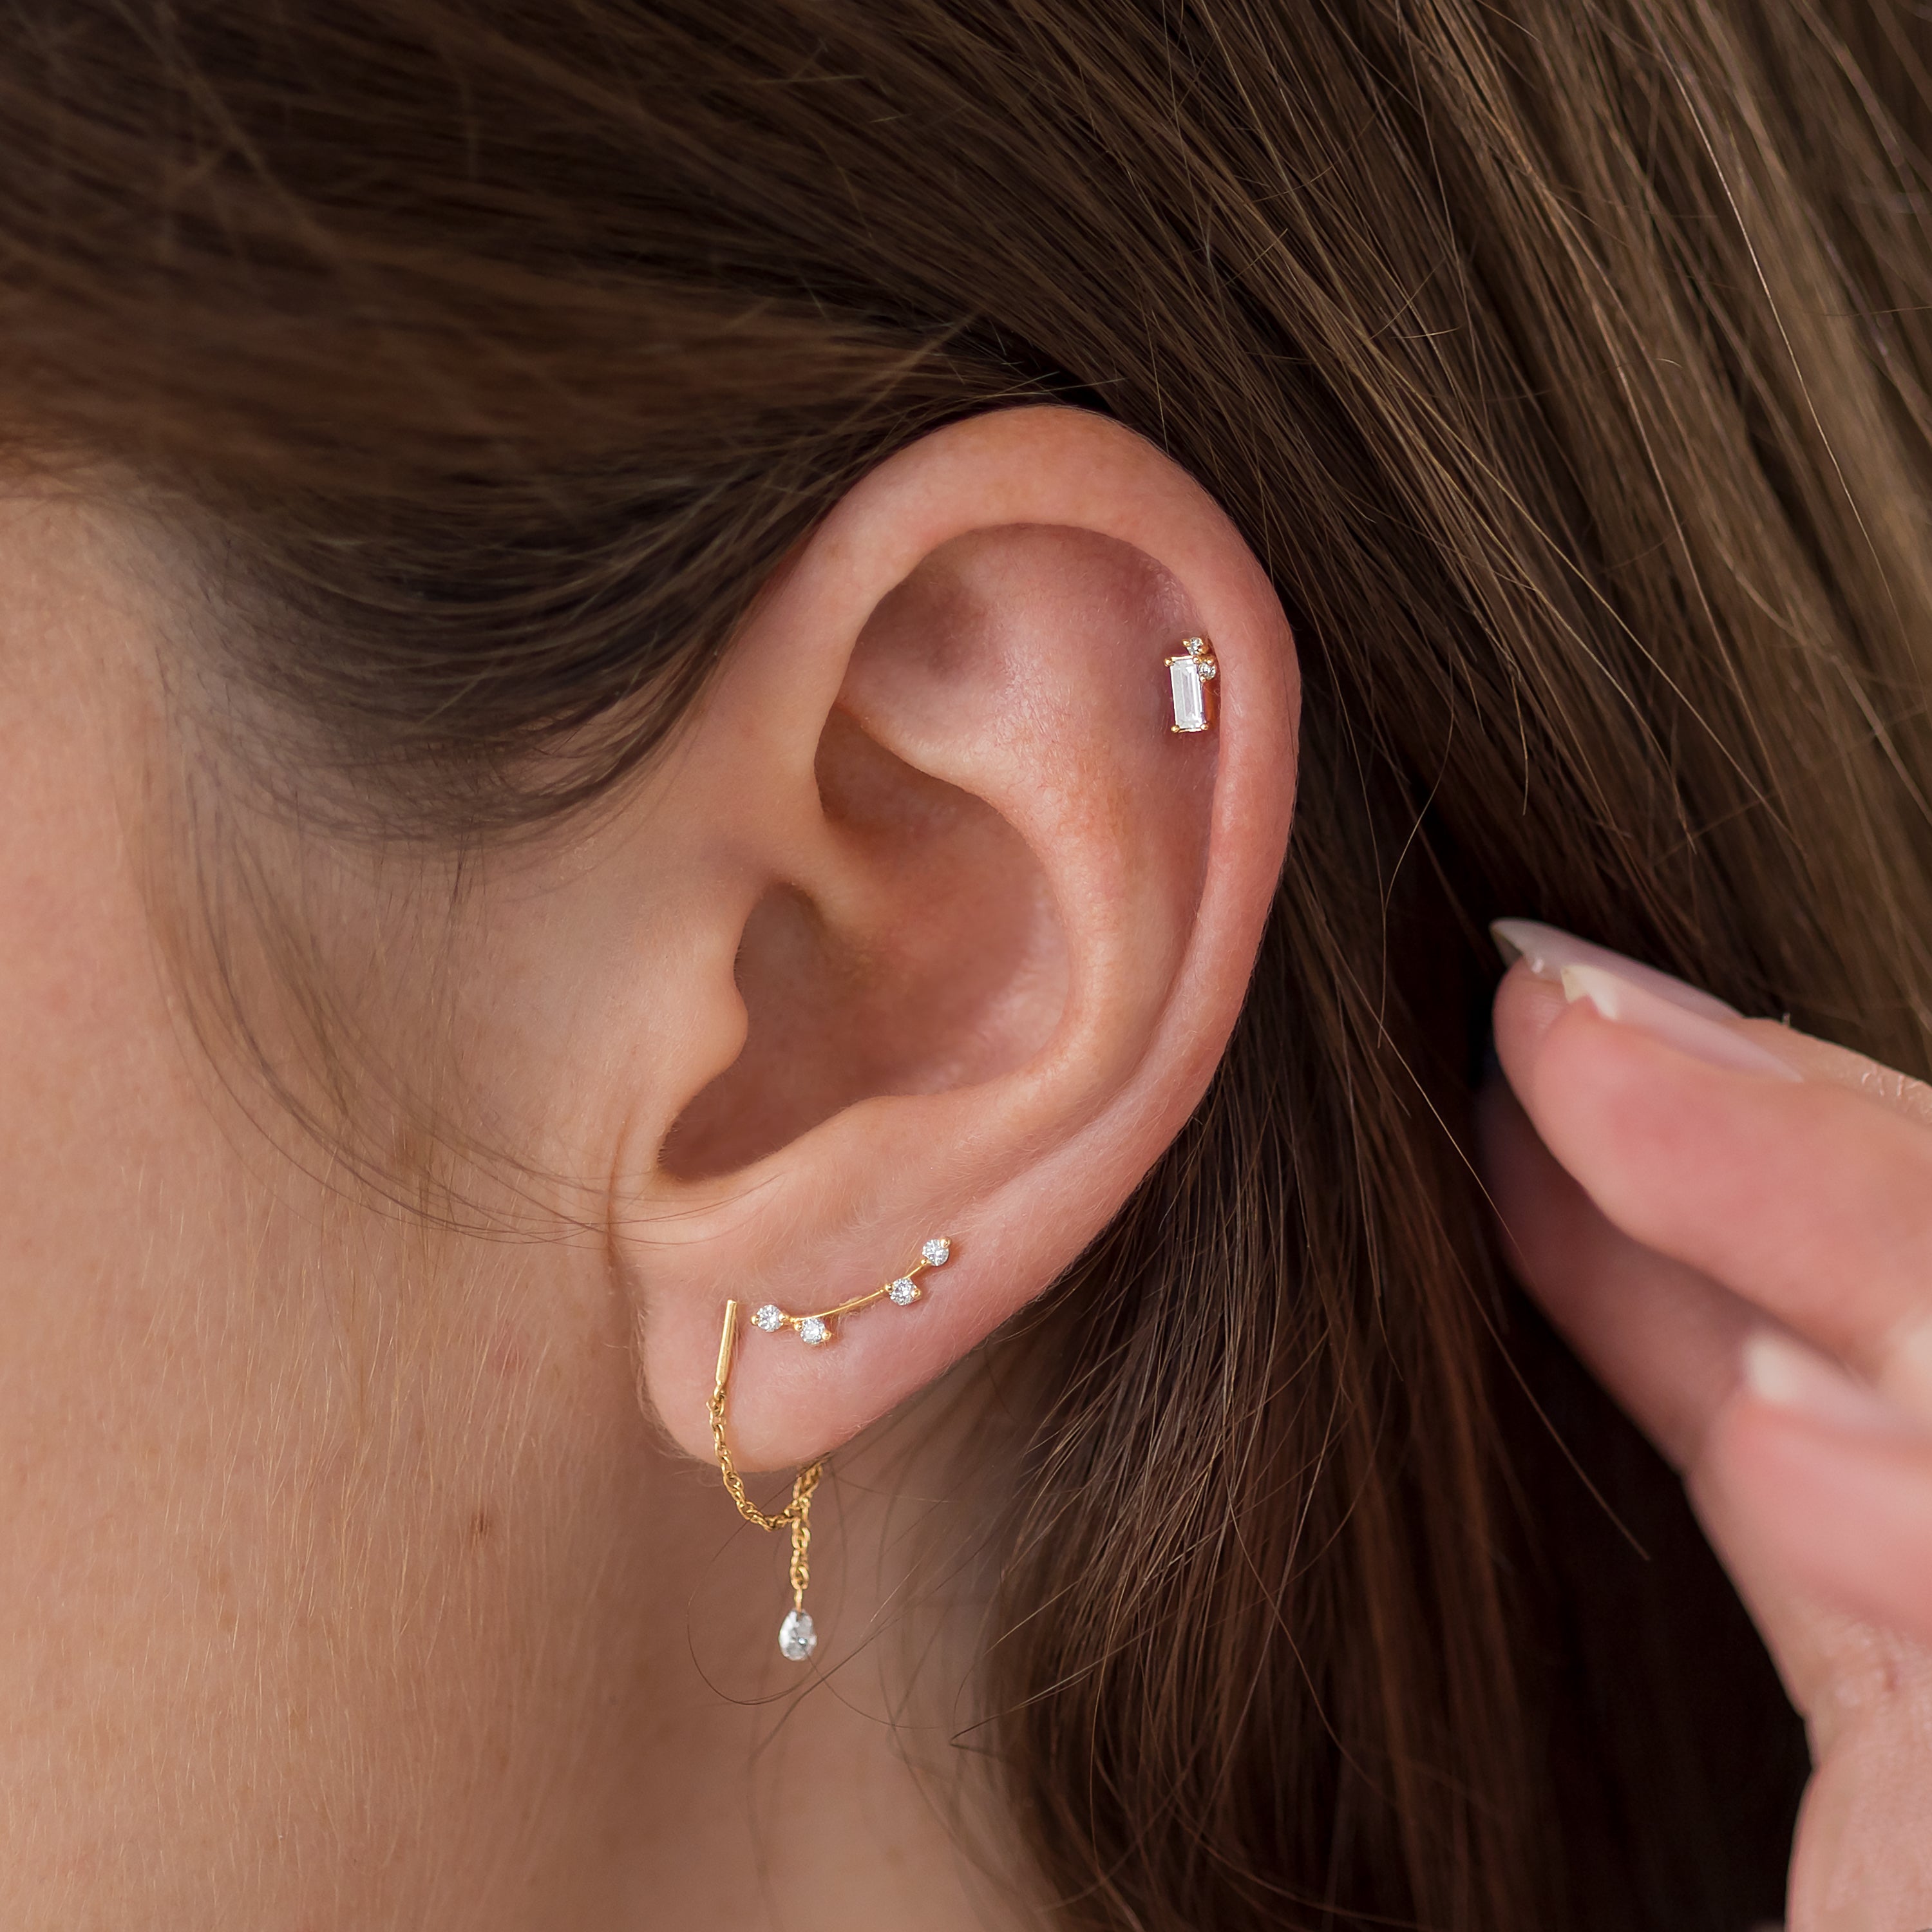 Threaded Studs | Delicate Earrings from Melanie Casey Natural Diamond / 2ctw.